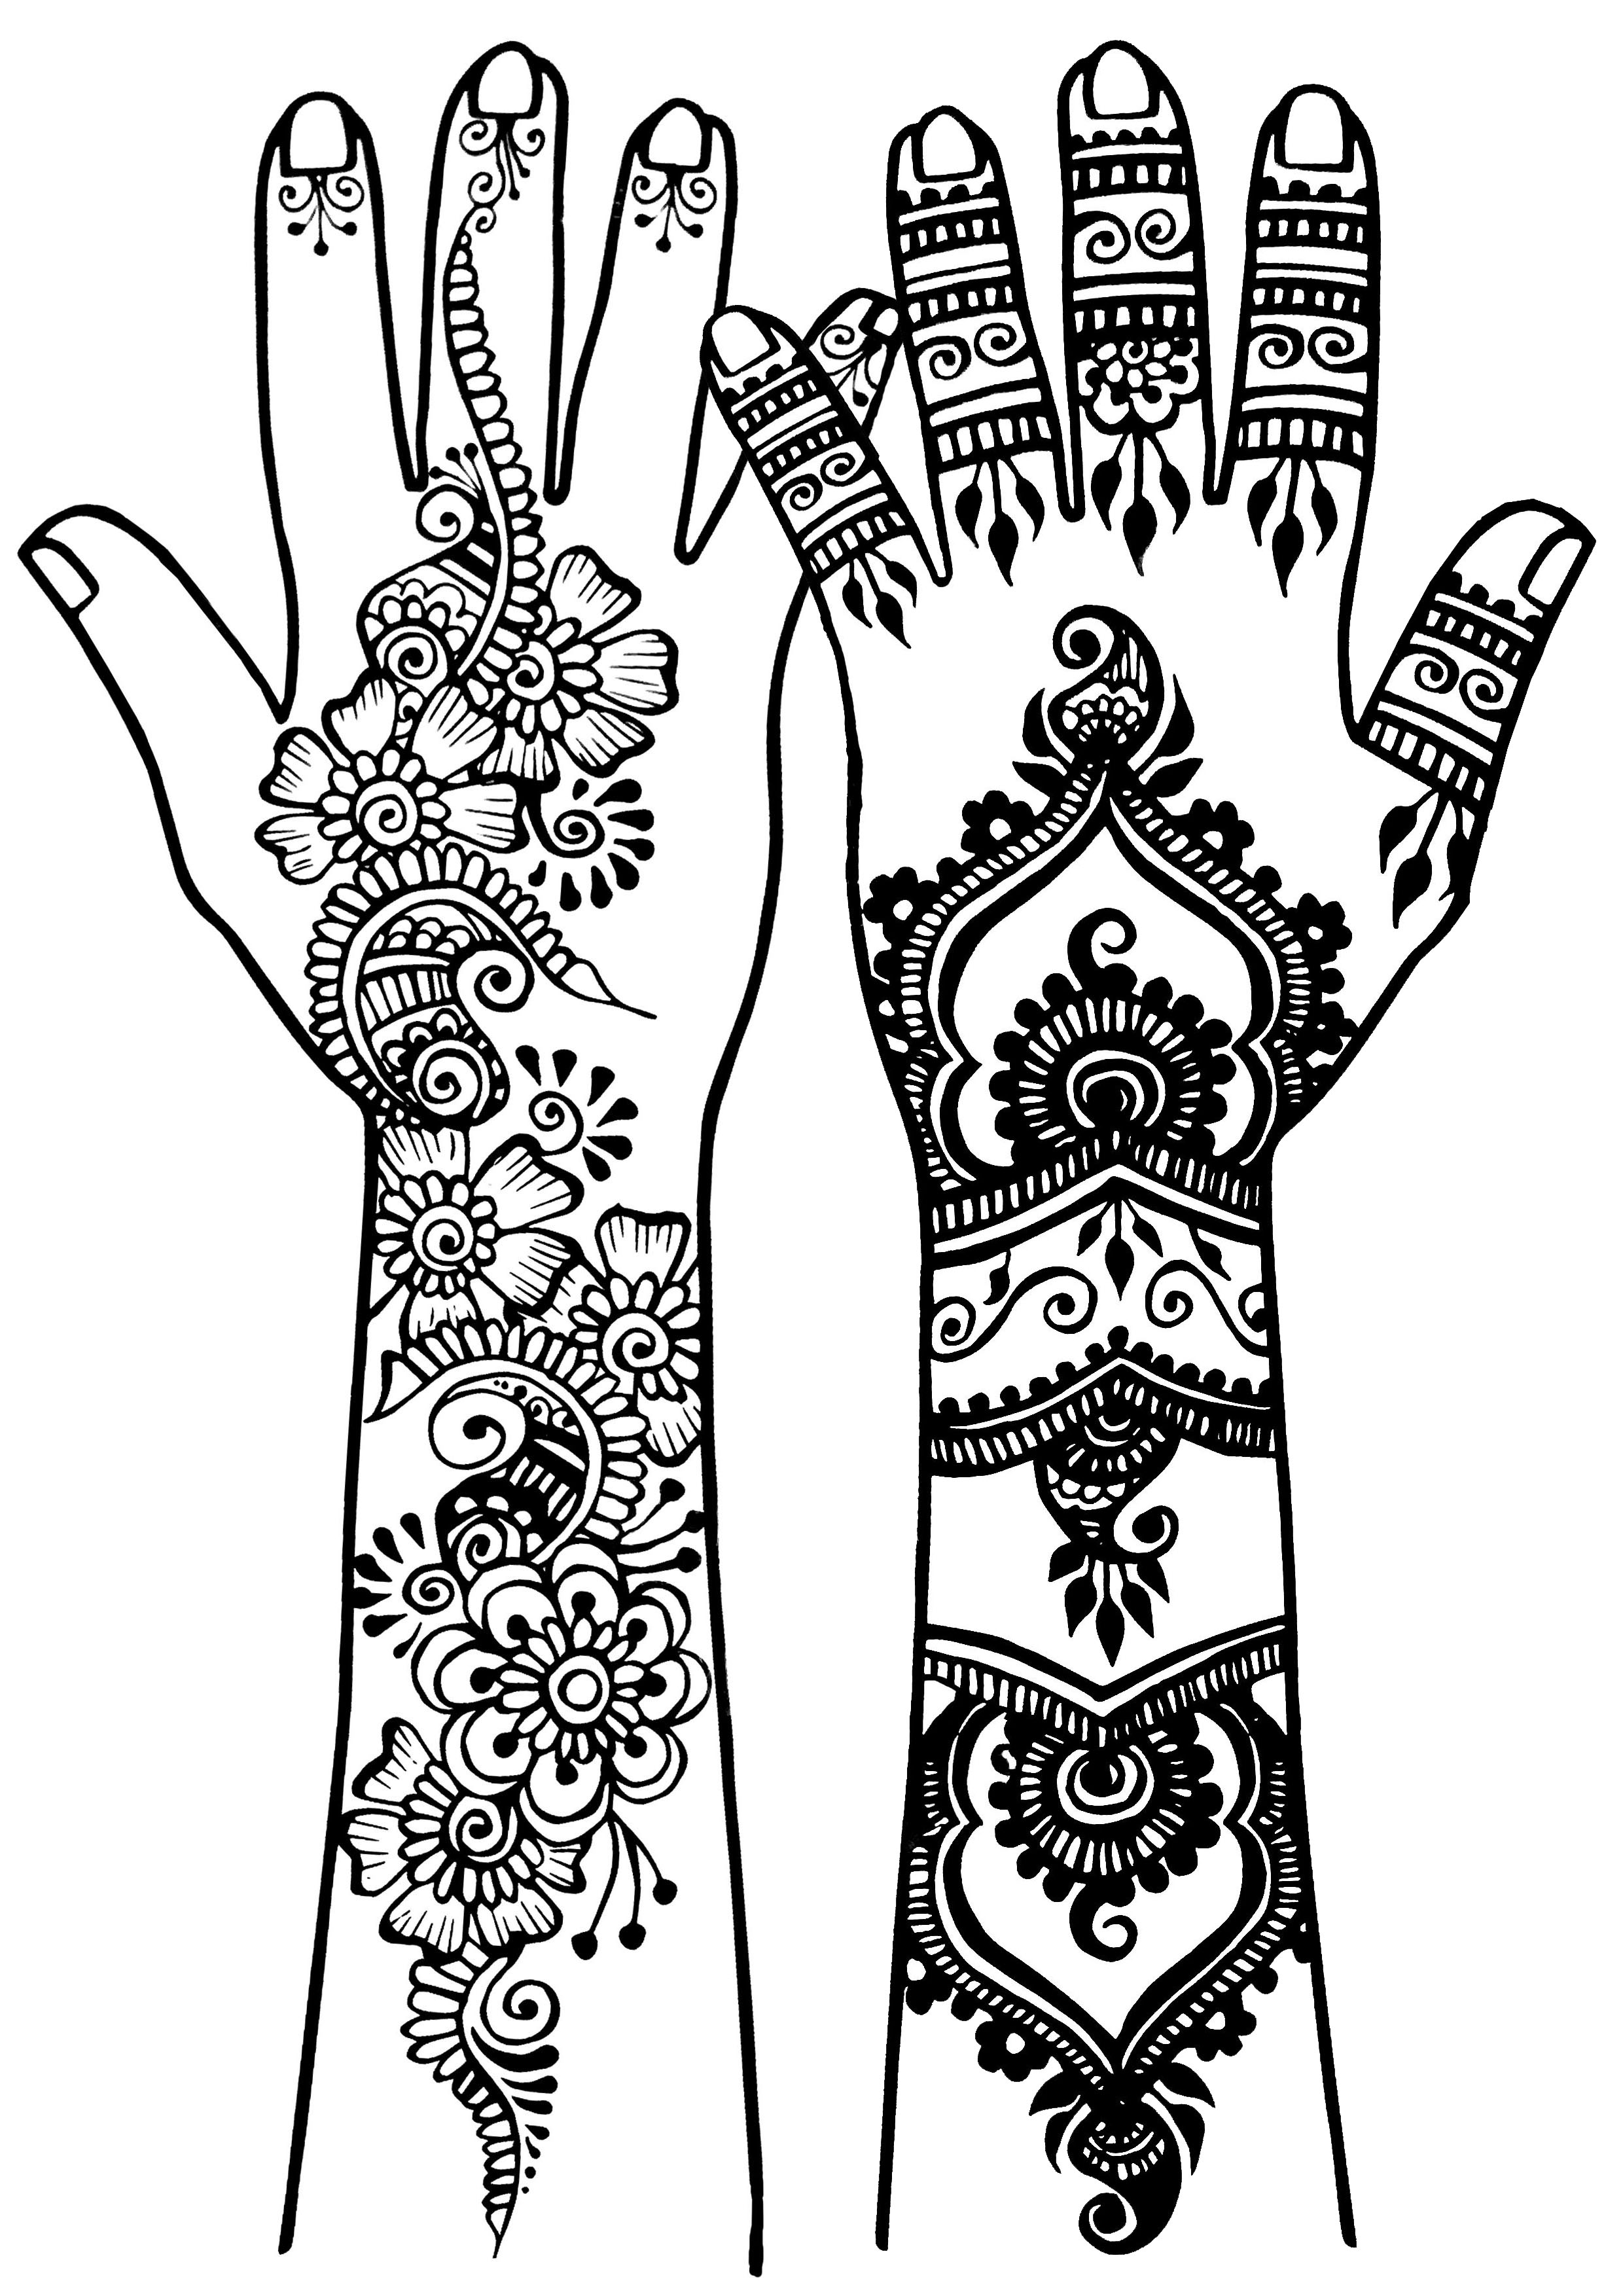 Cute Arms and Hands Tattoos